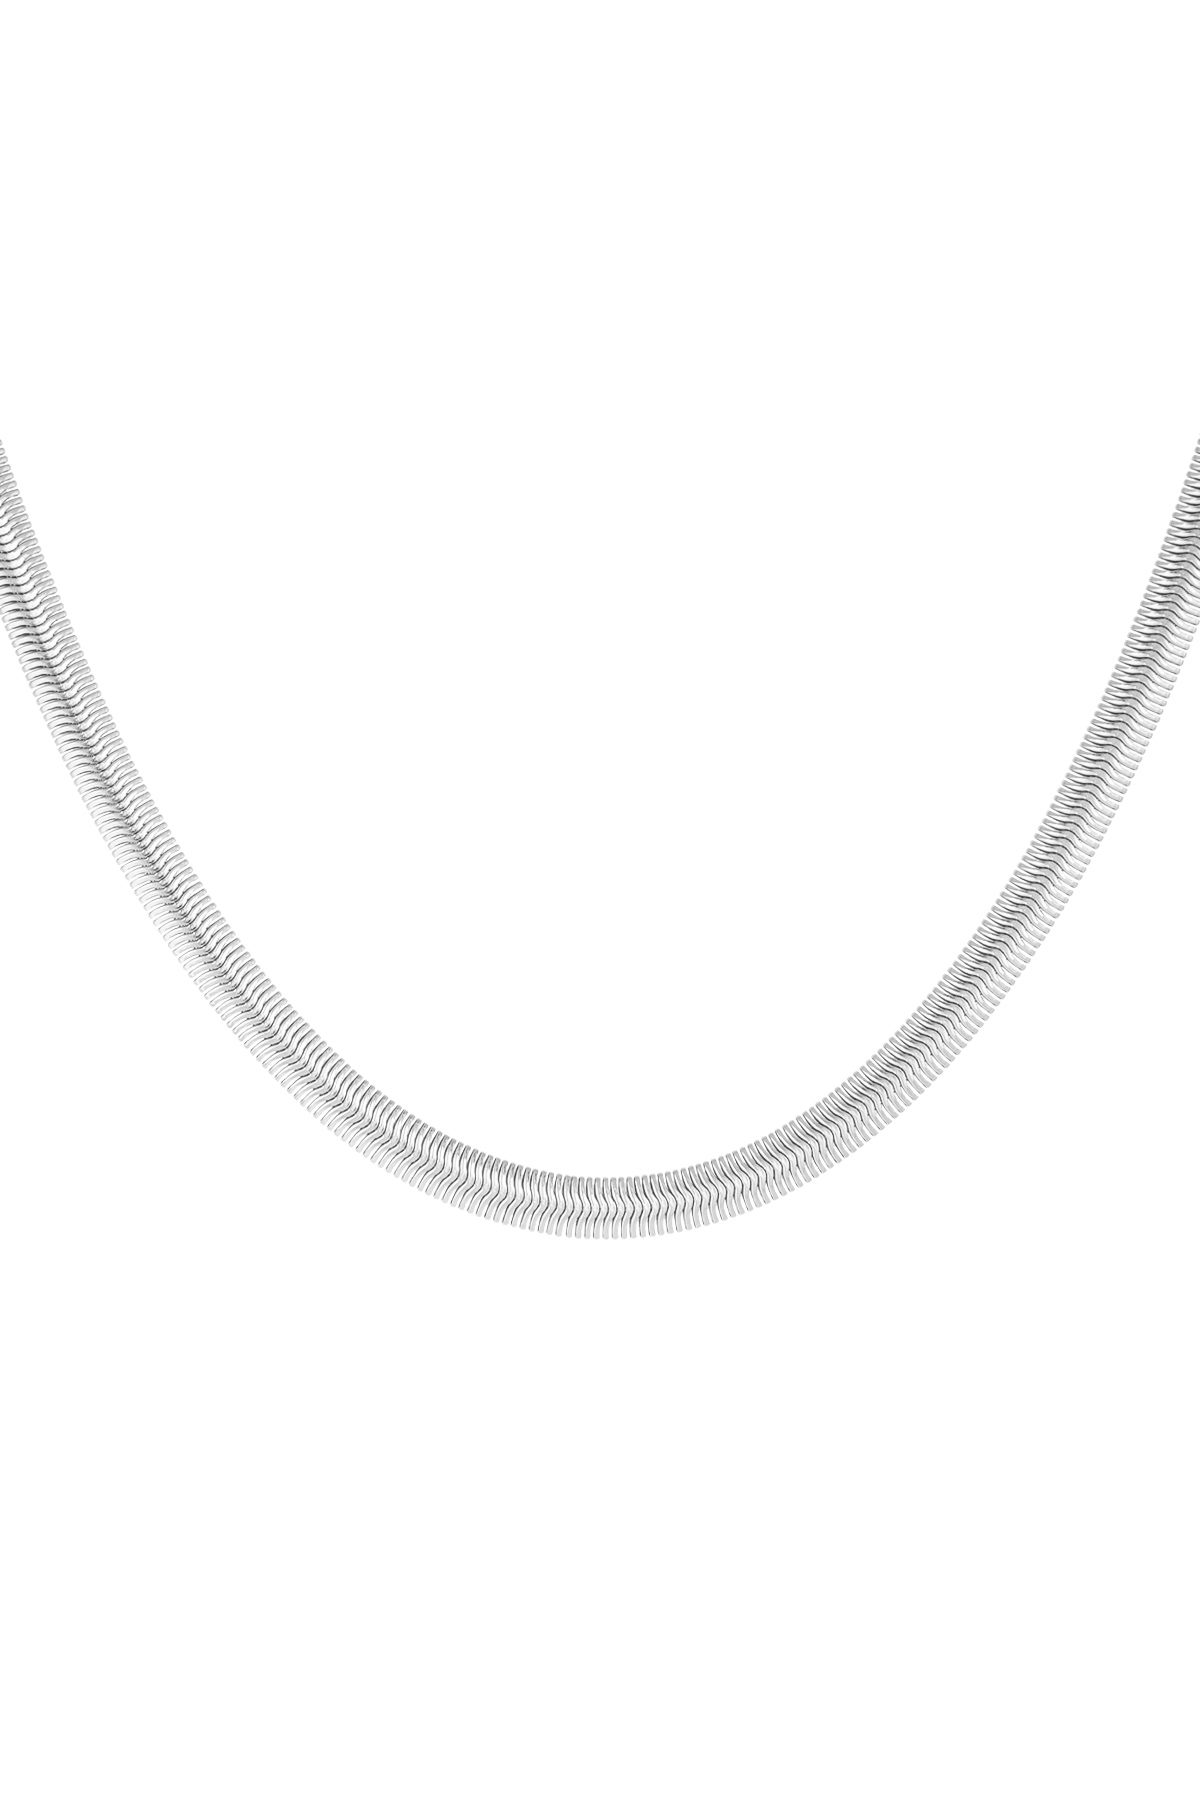 Necklace flat with print - silver-6.0MM